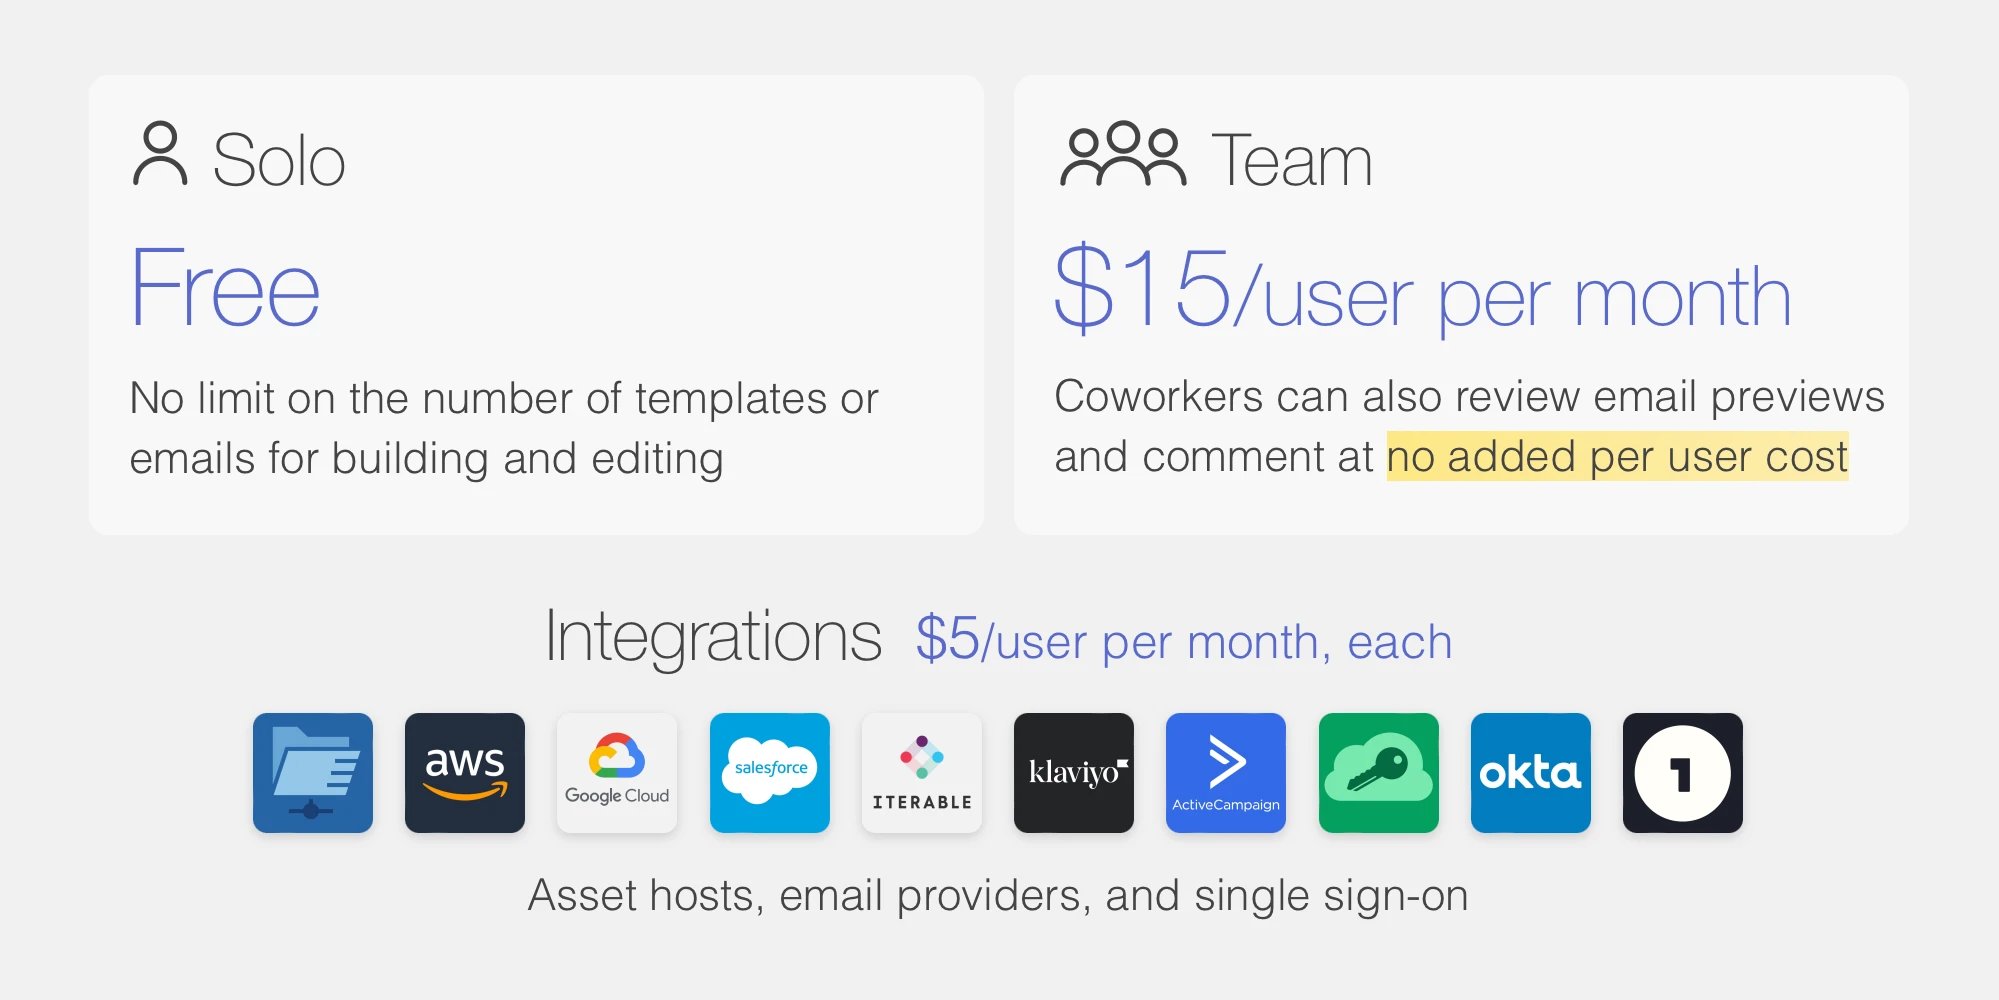 Solo - Free - No limit on the number of templates or emails for building and editing | Team - $15/user per month - Coworkers can also review email previews and comment at no added per user cost | Integrations - $5/user per month, each